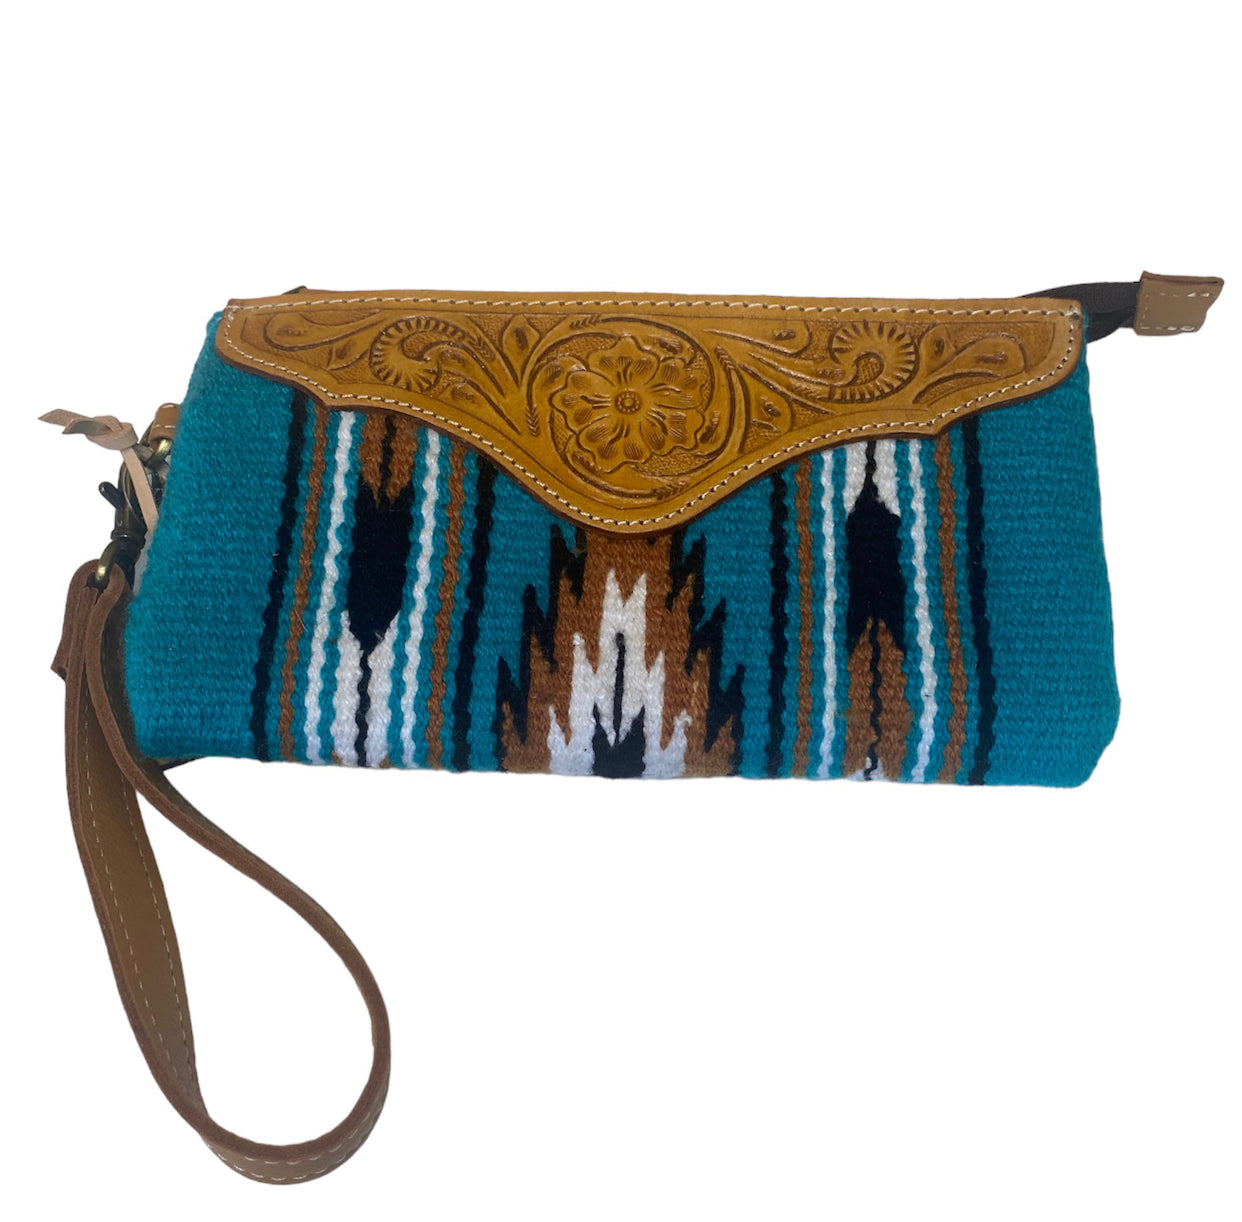 A8274 - Blue Saddle Blanket Large Clutch with Tooled Leather